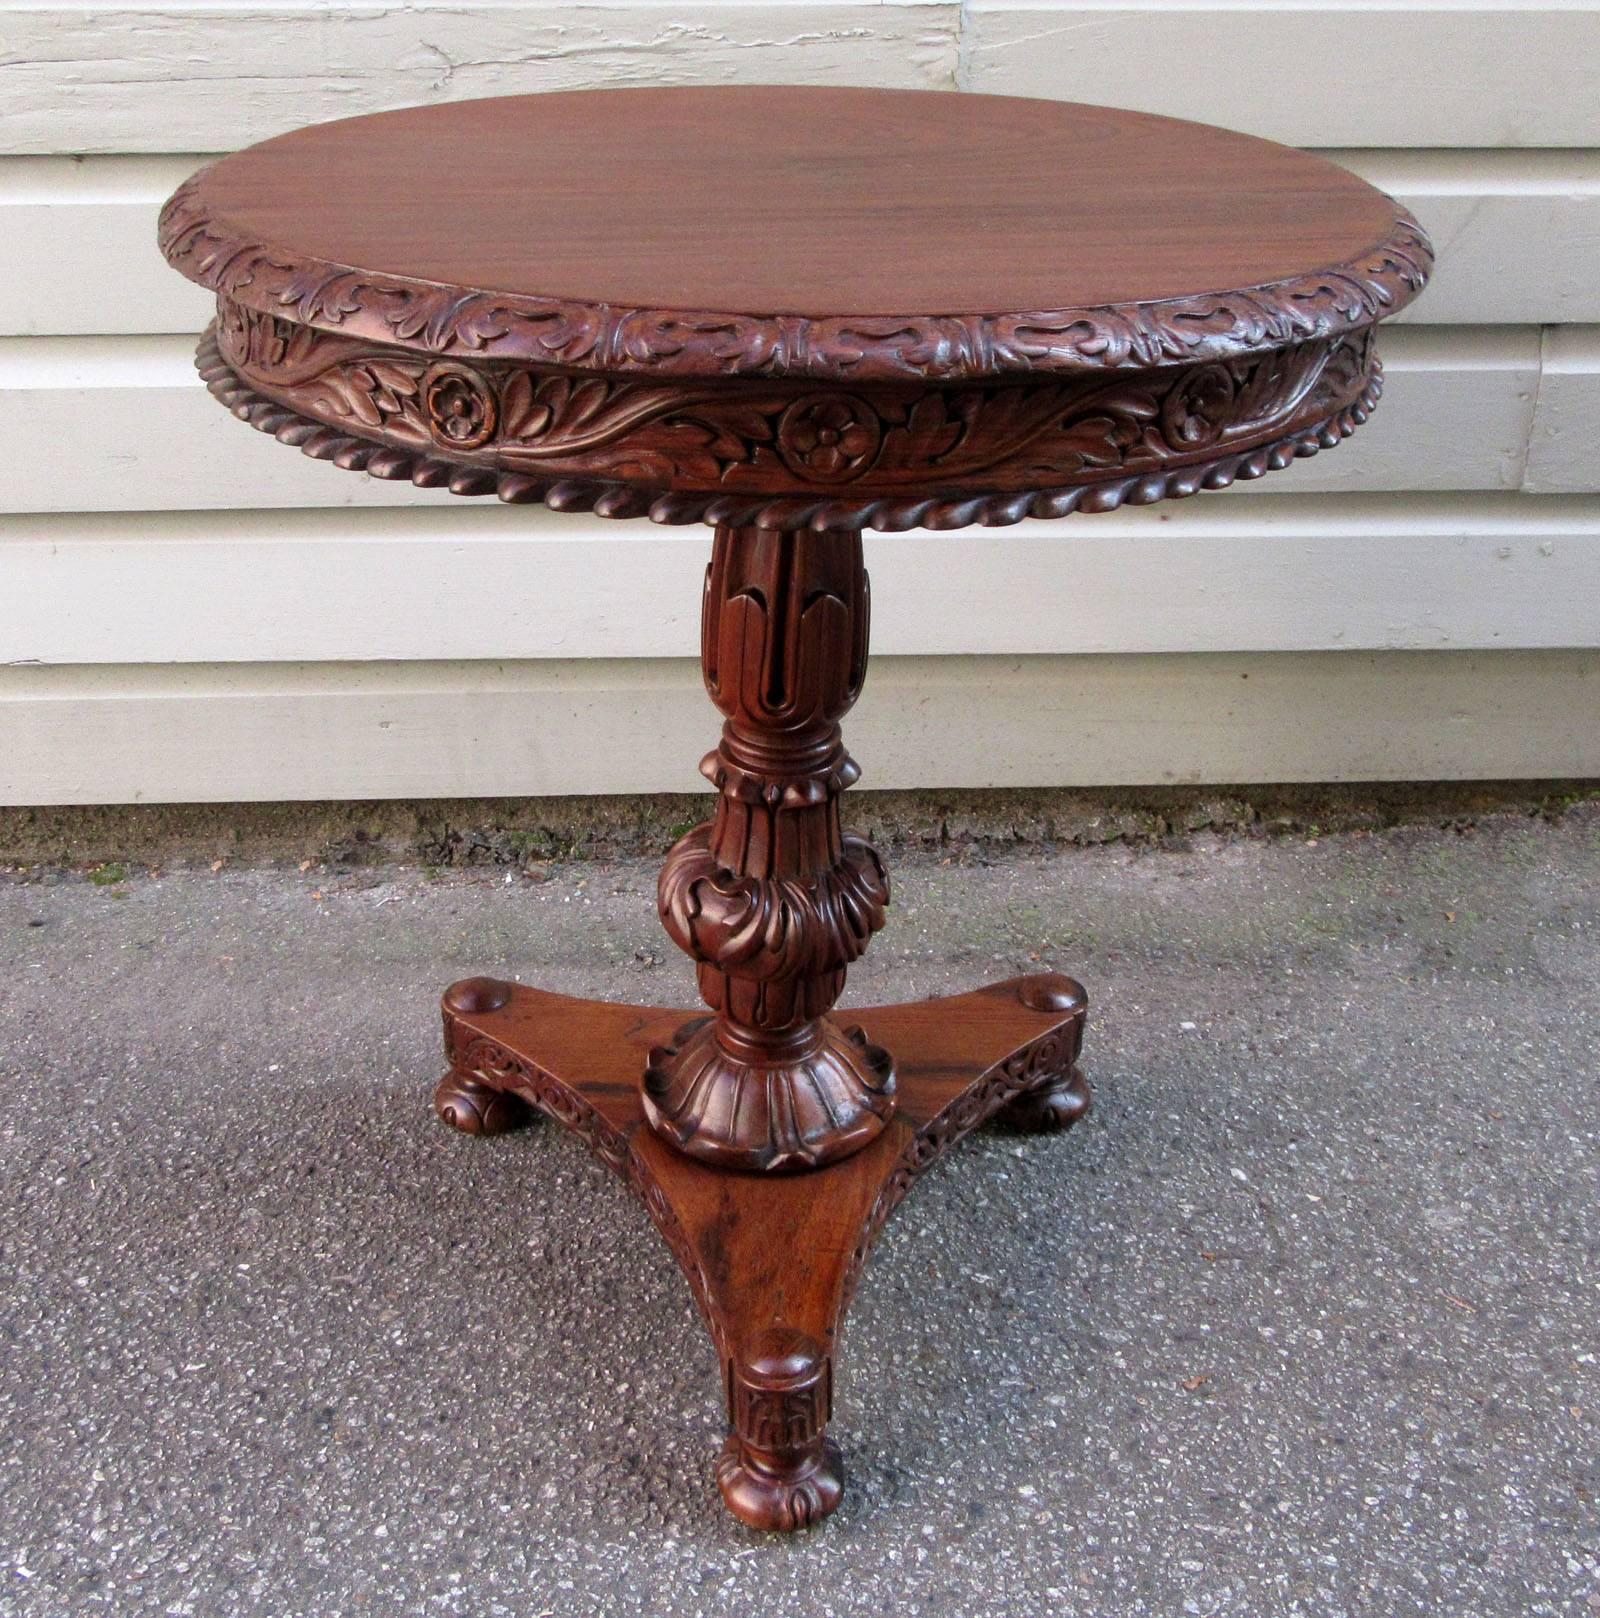 A British Colonial Regency solid rosewood table made in India, circa 1830, featuring an elaborately carved apron and tripod pedestal base with bun feet.